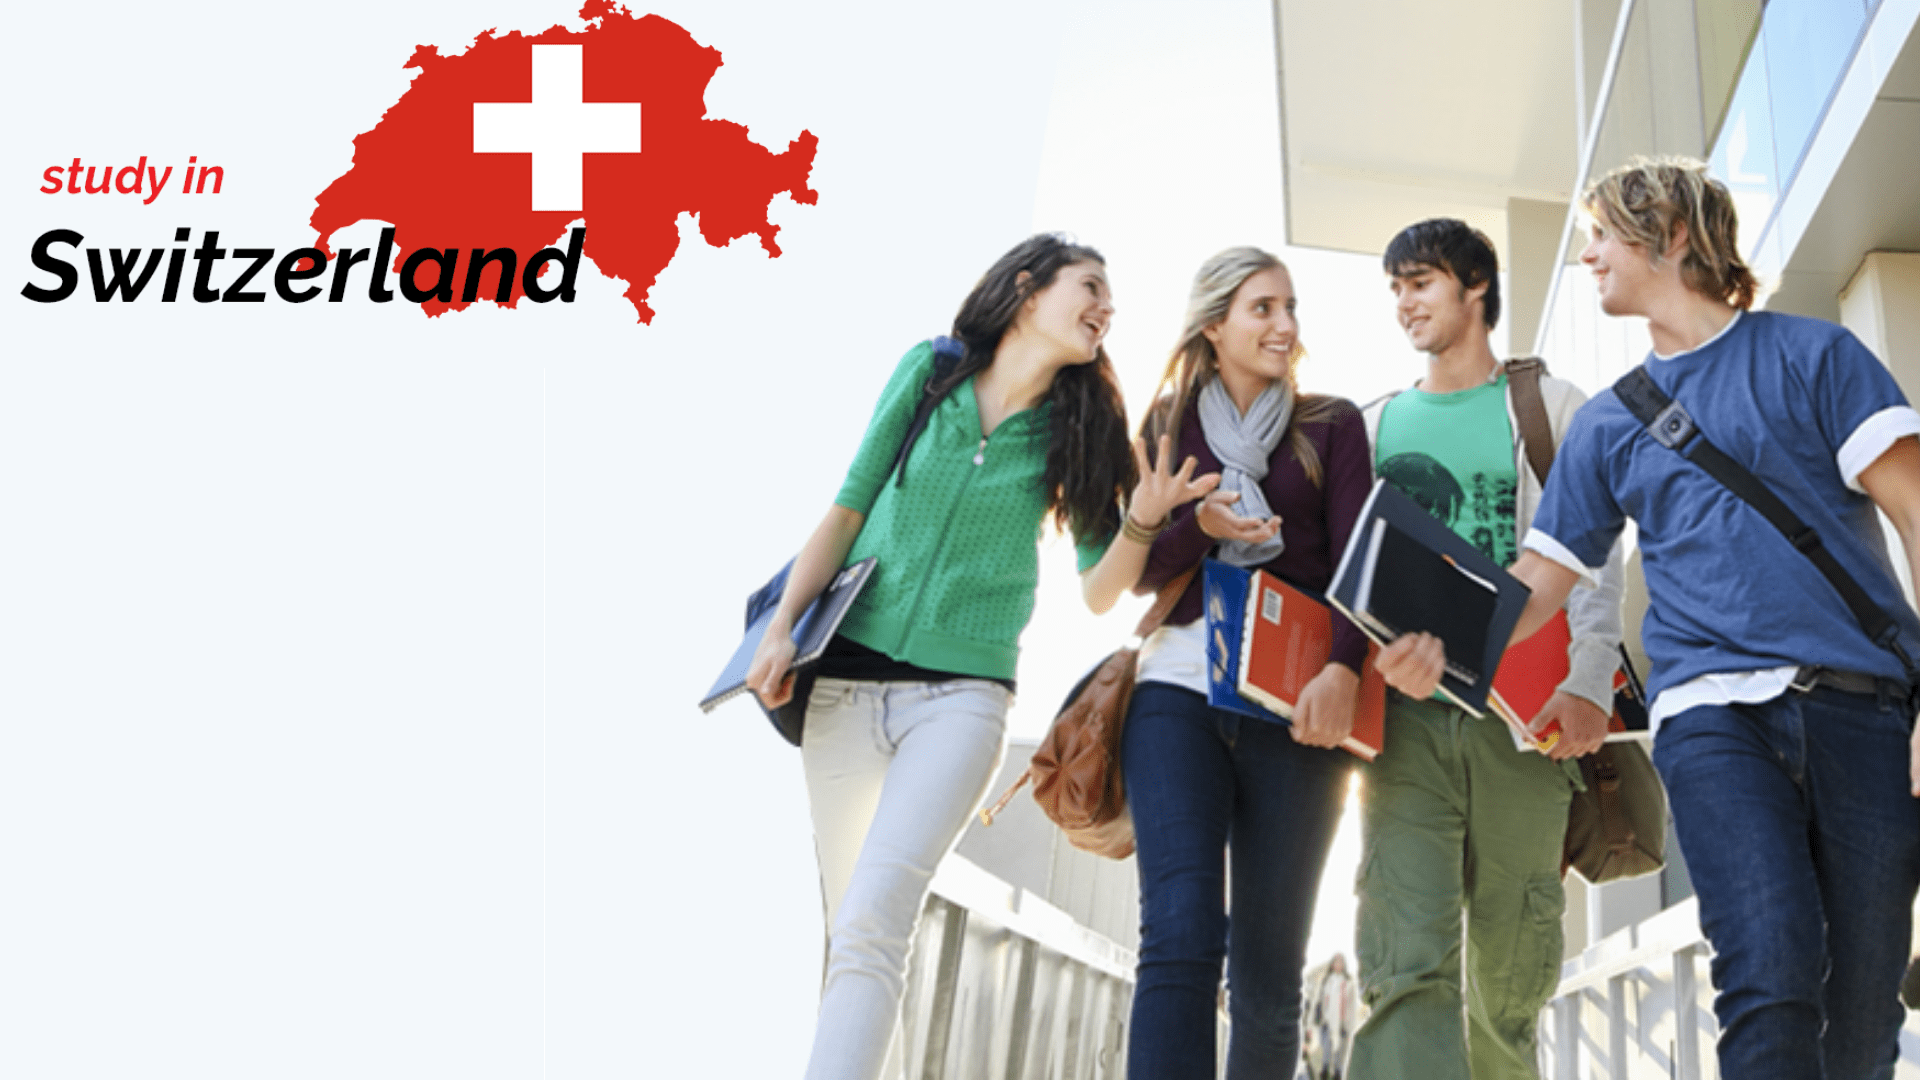 Study in Switzerland? Peek into the exams you might need to take!